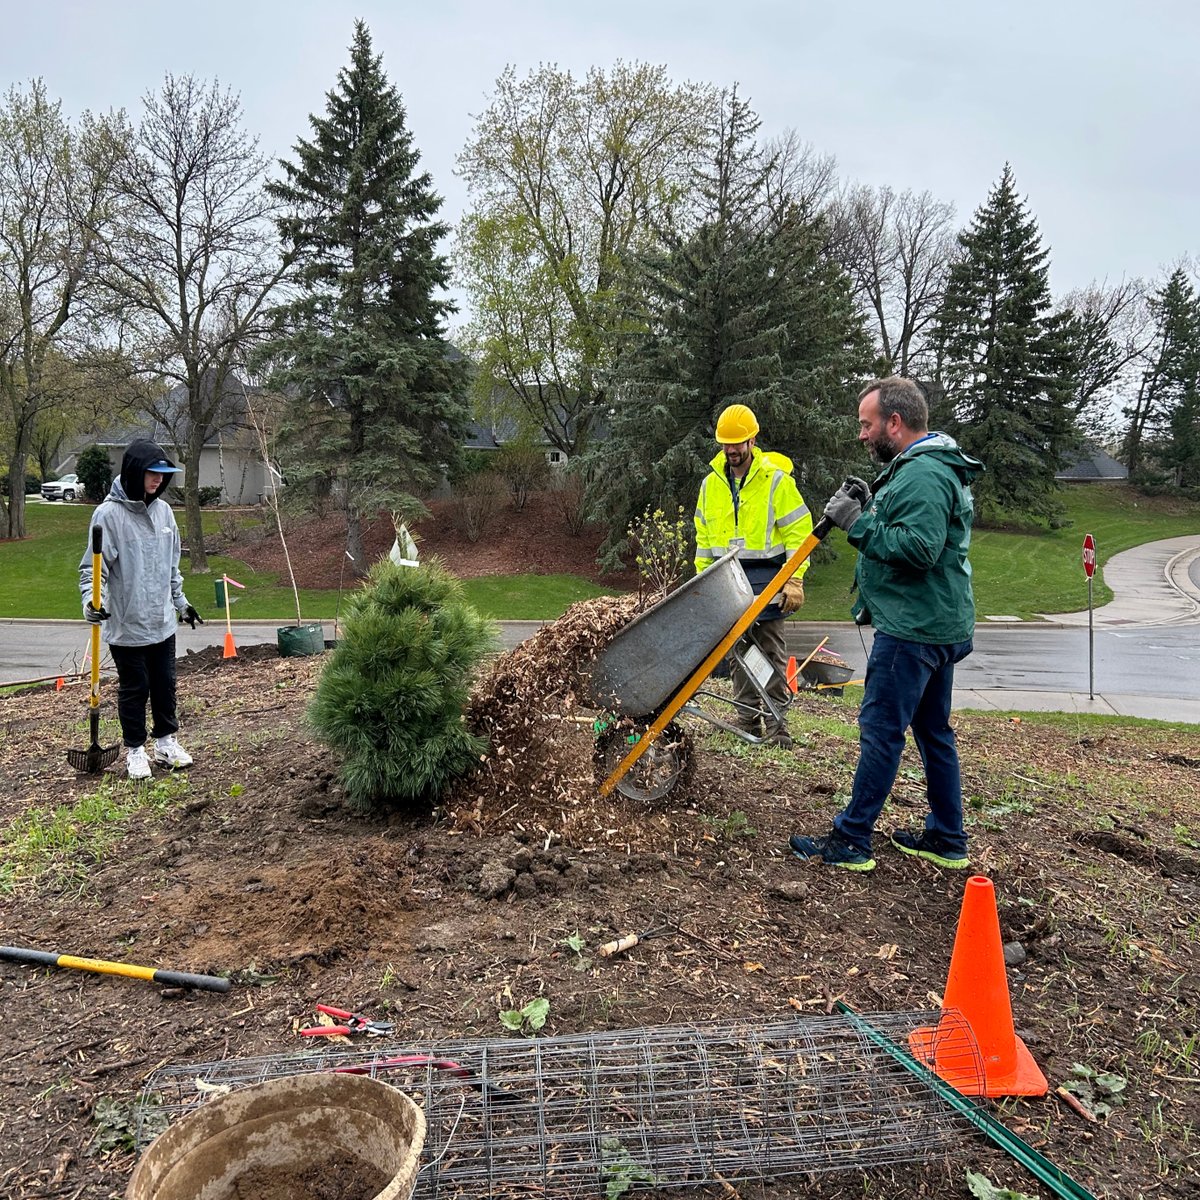 It’s National Arbor Day! Raise your limbs to celebrate members of the Minnetonka Rotary Club, who volunteered with Natural Resources staff to plant trees near @mtkafd Fire Station 5, where emerald ash borer-infested ash were recently removed.